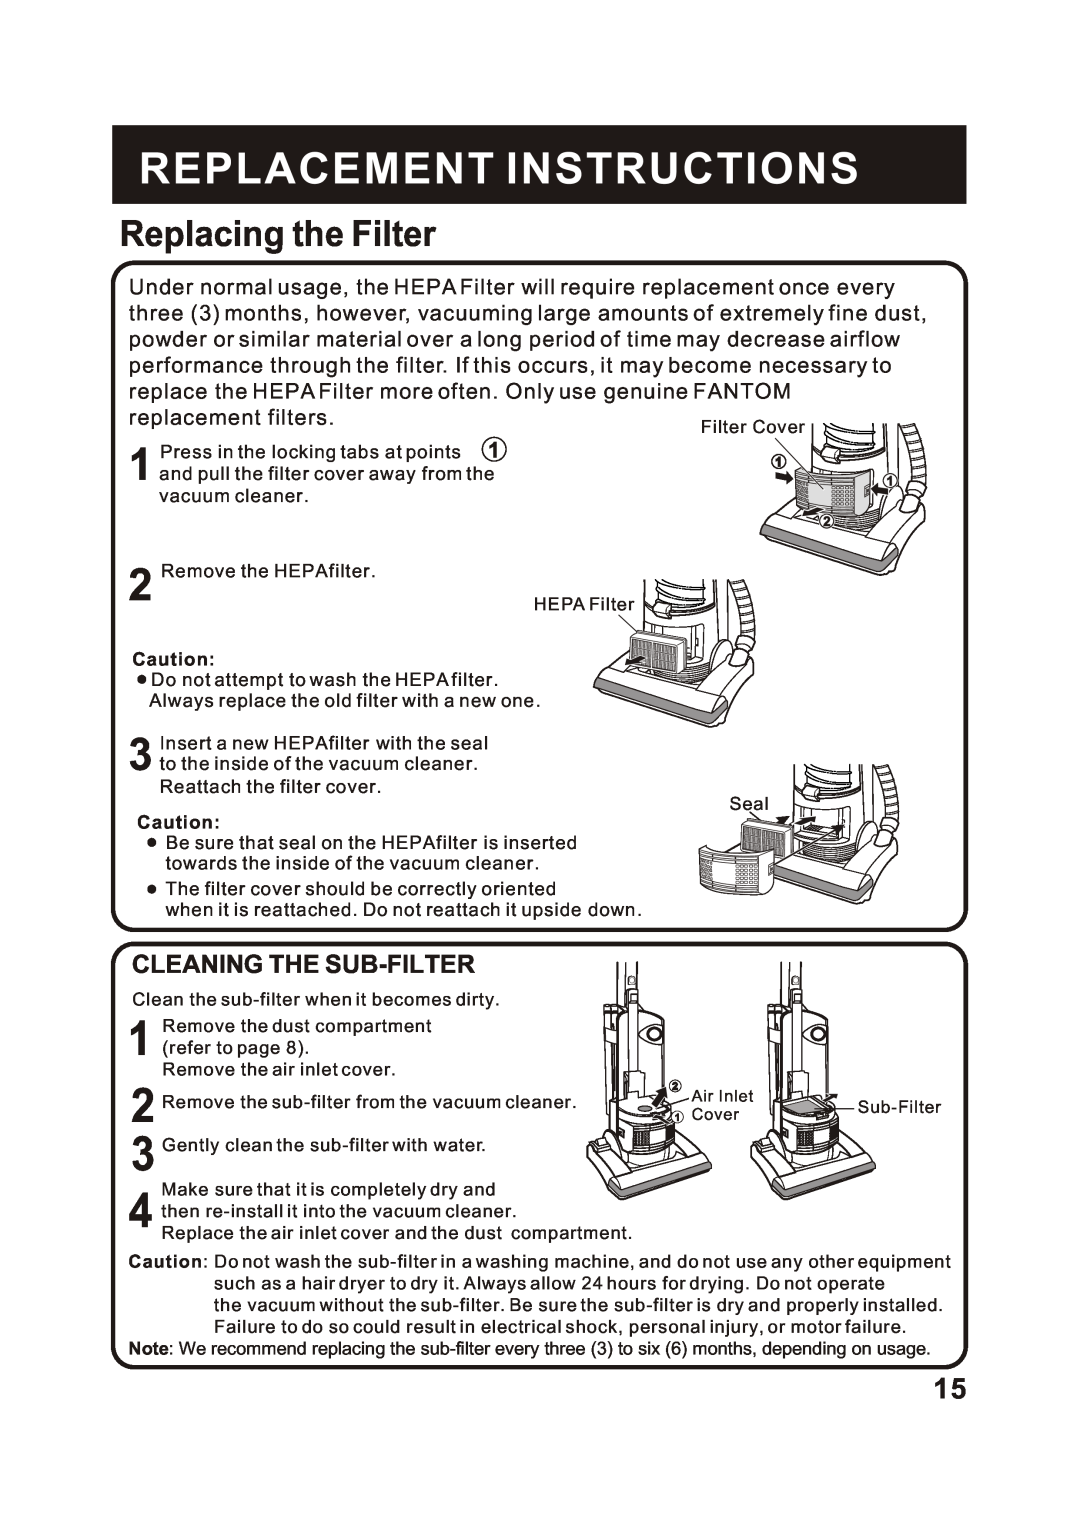 Fantom Vacuum FM741HV instruction manual Replacing the Filter, Cleaning The Sub-Filter, Replacement Instructions 